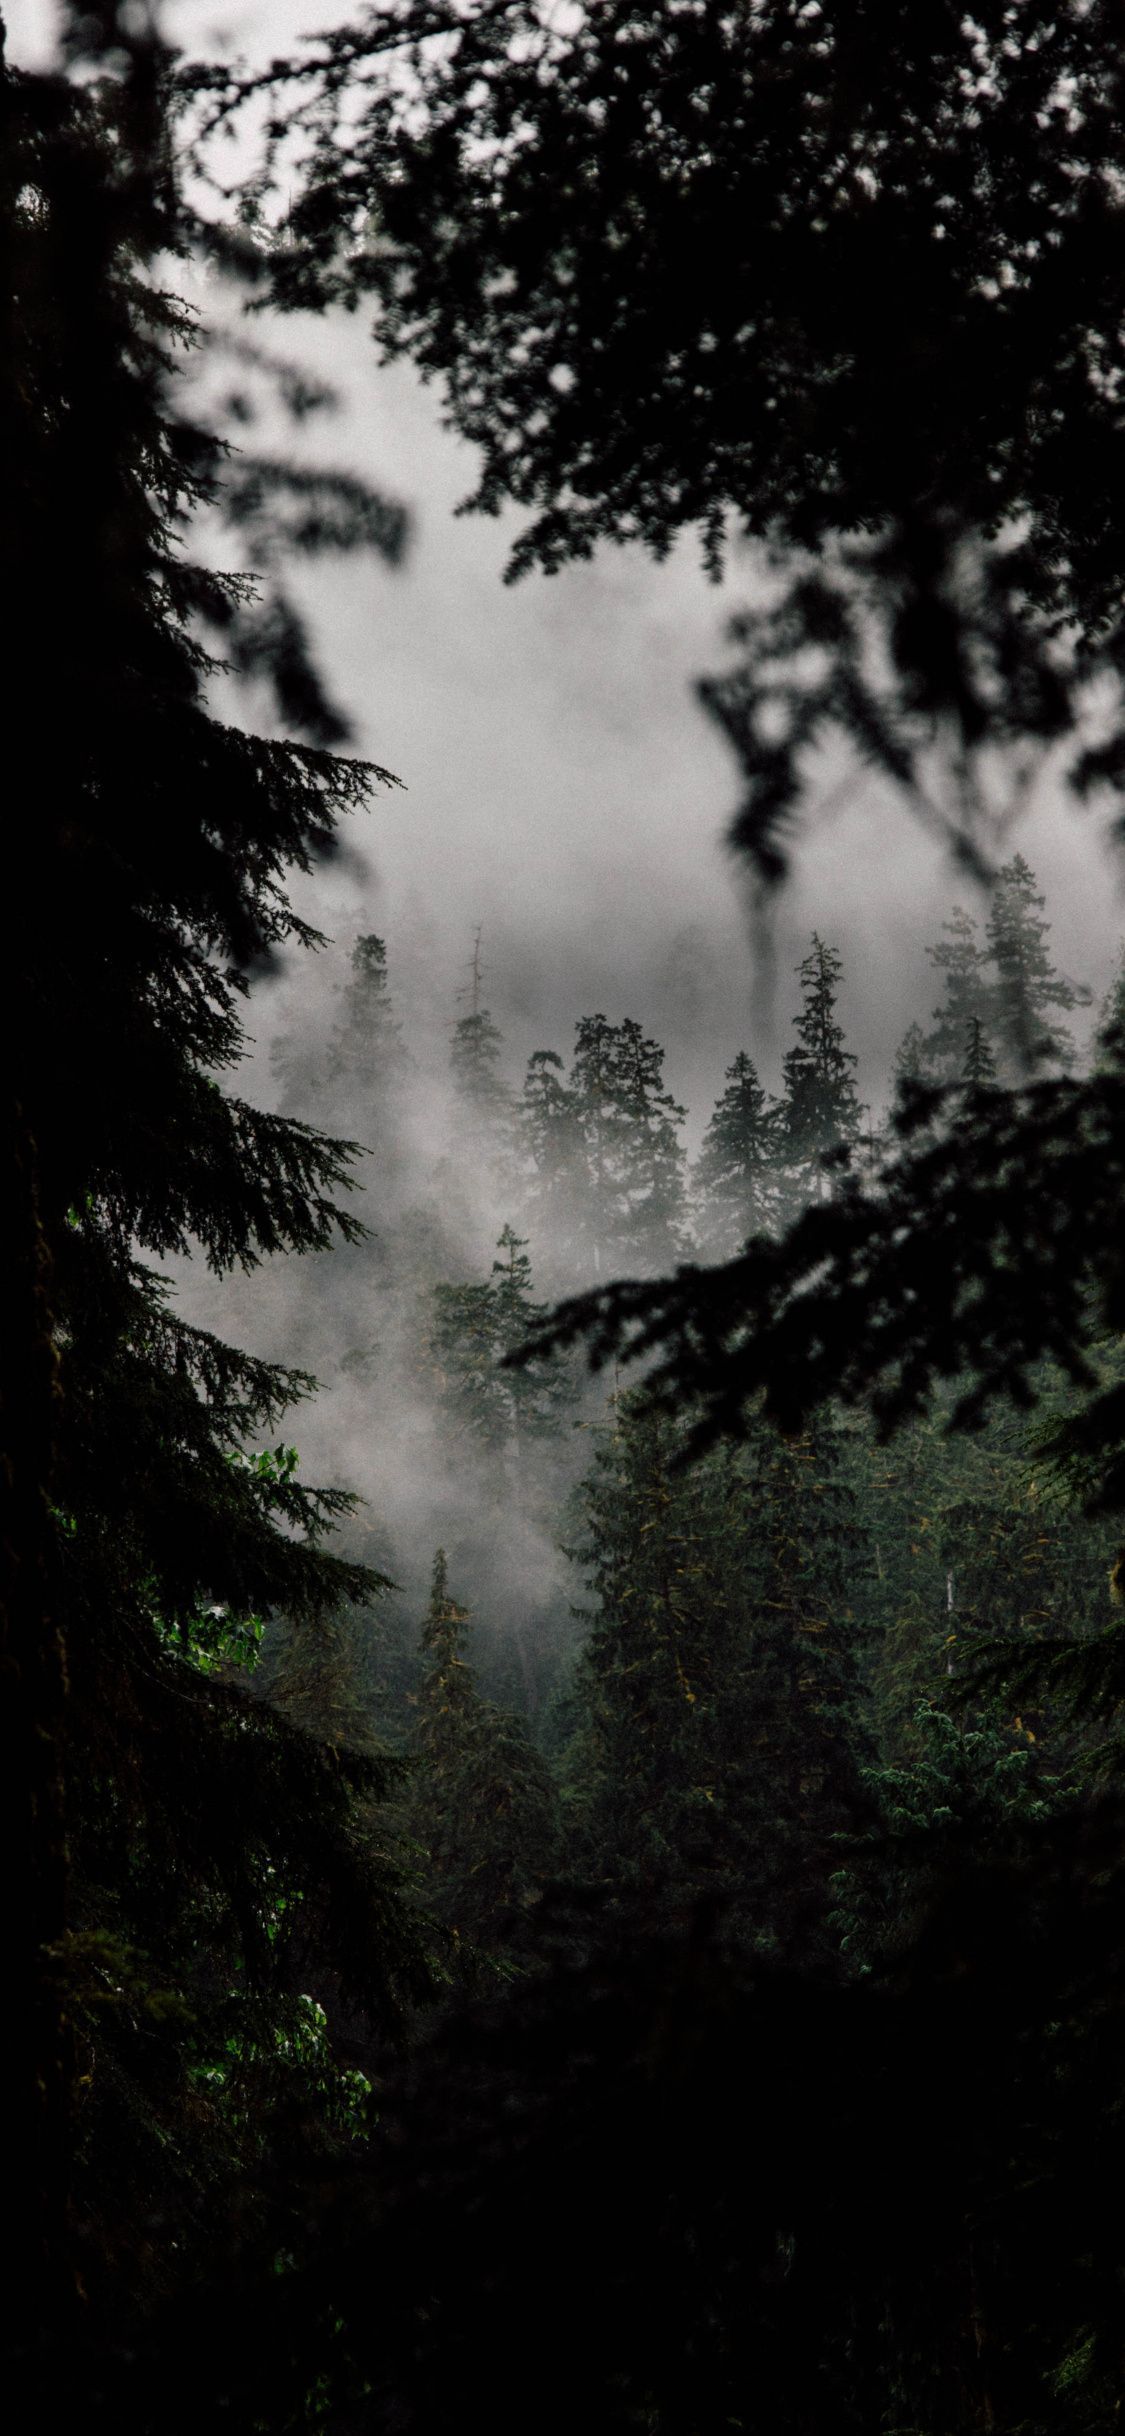 A foggy forest with trees and mountains - Twilight